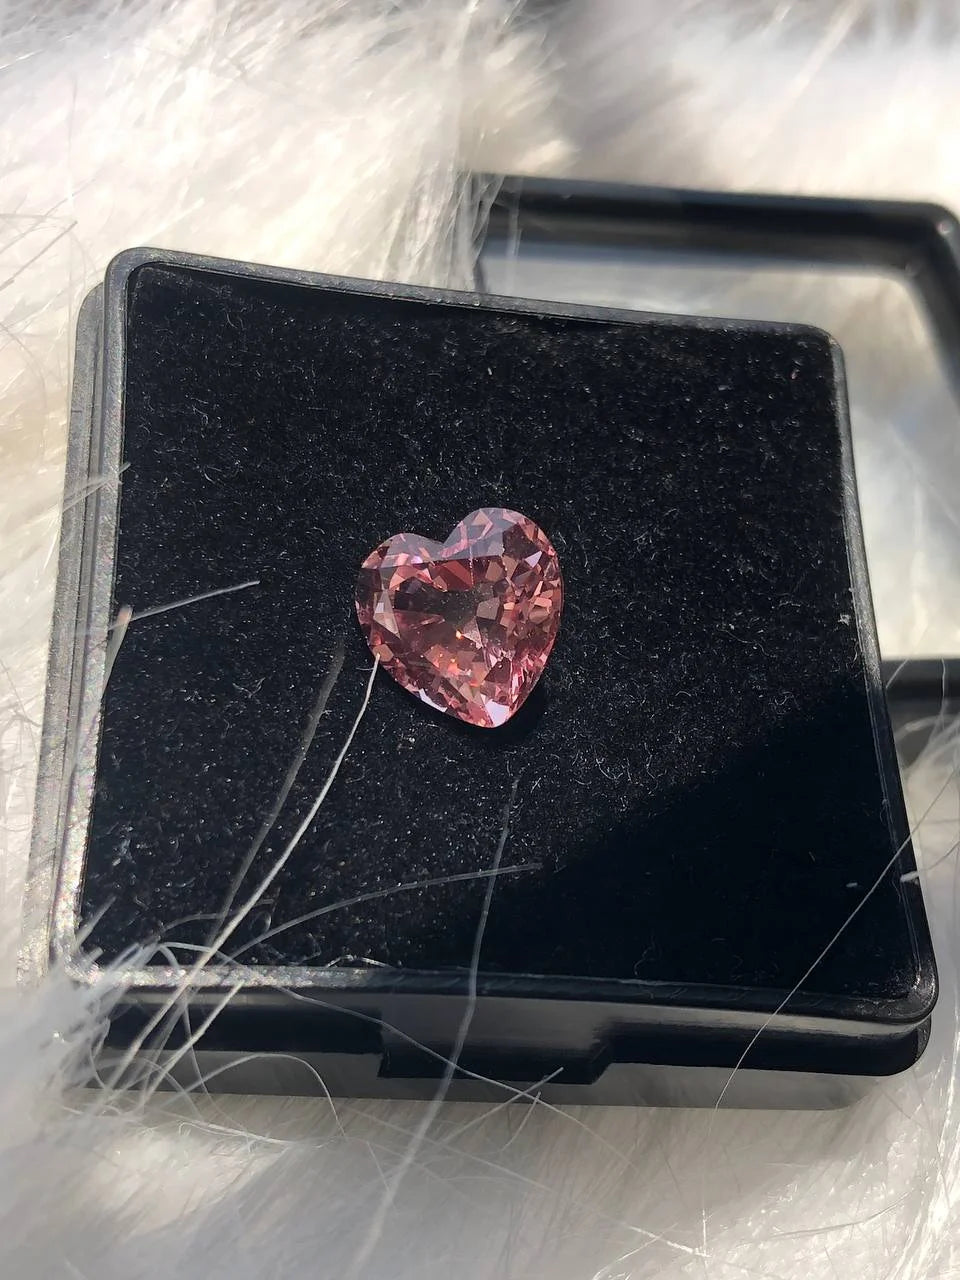 Exquisite 4.9T Heart Shaped Pink Sapphire Loose Gemstone For Stunning Rings | Shop Now